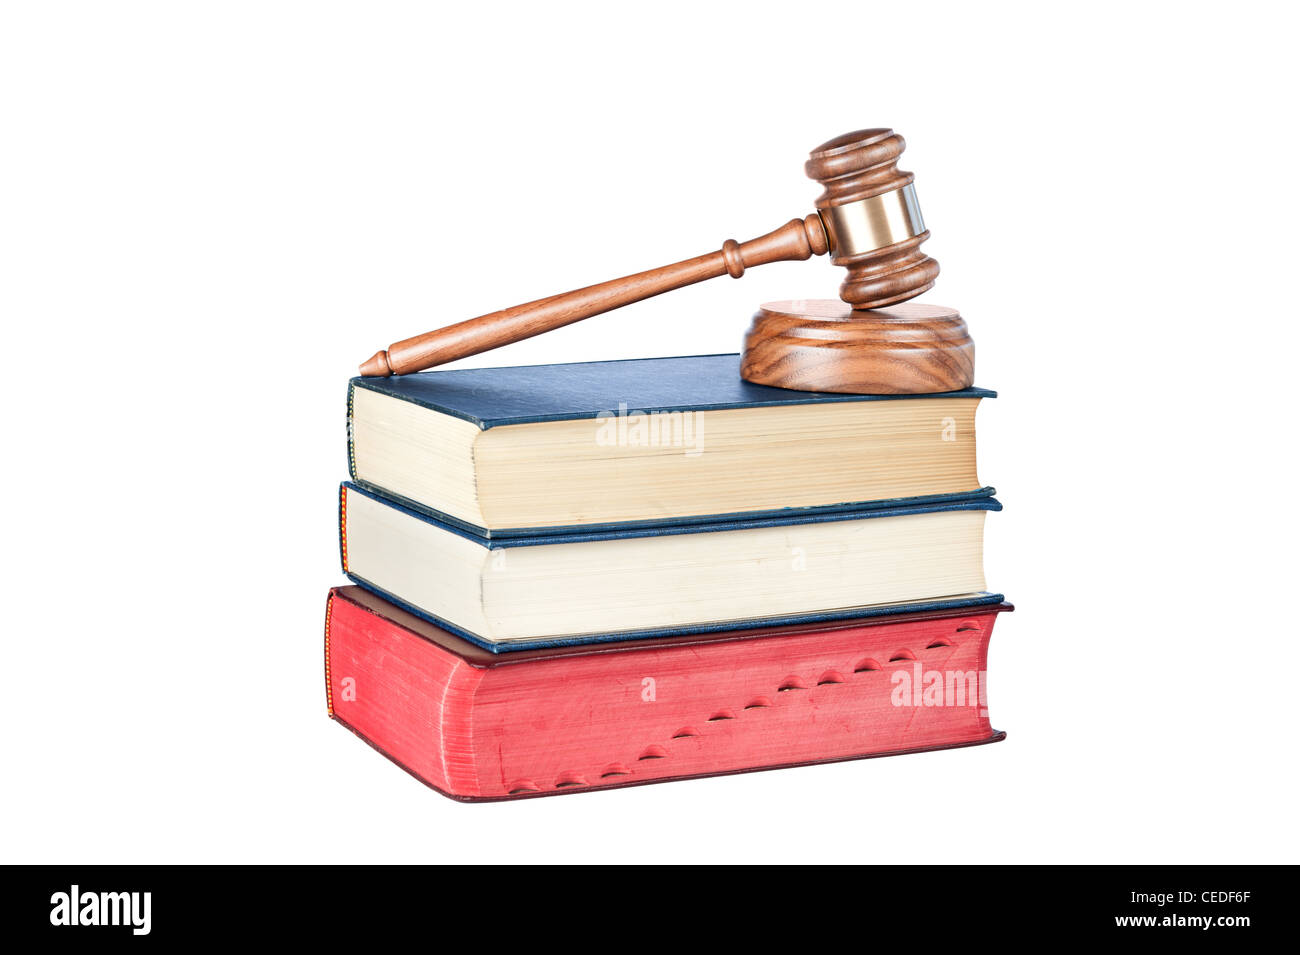 A gavel and sound block on thick legal reference books isolated on white. Stock Photo